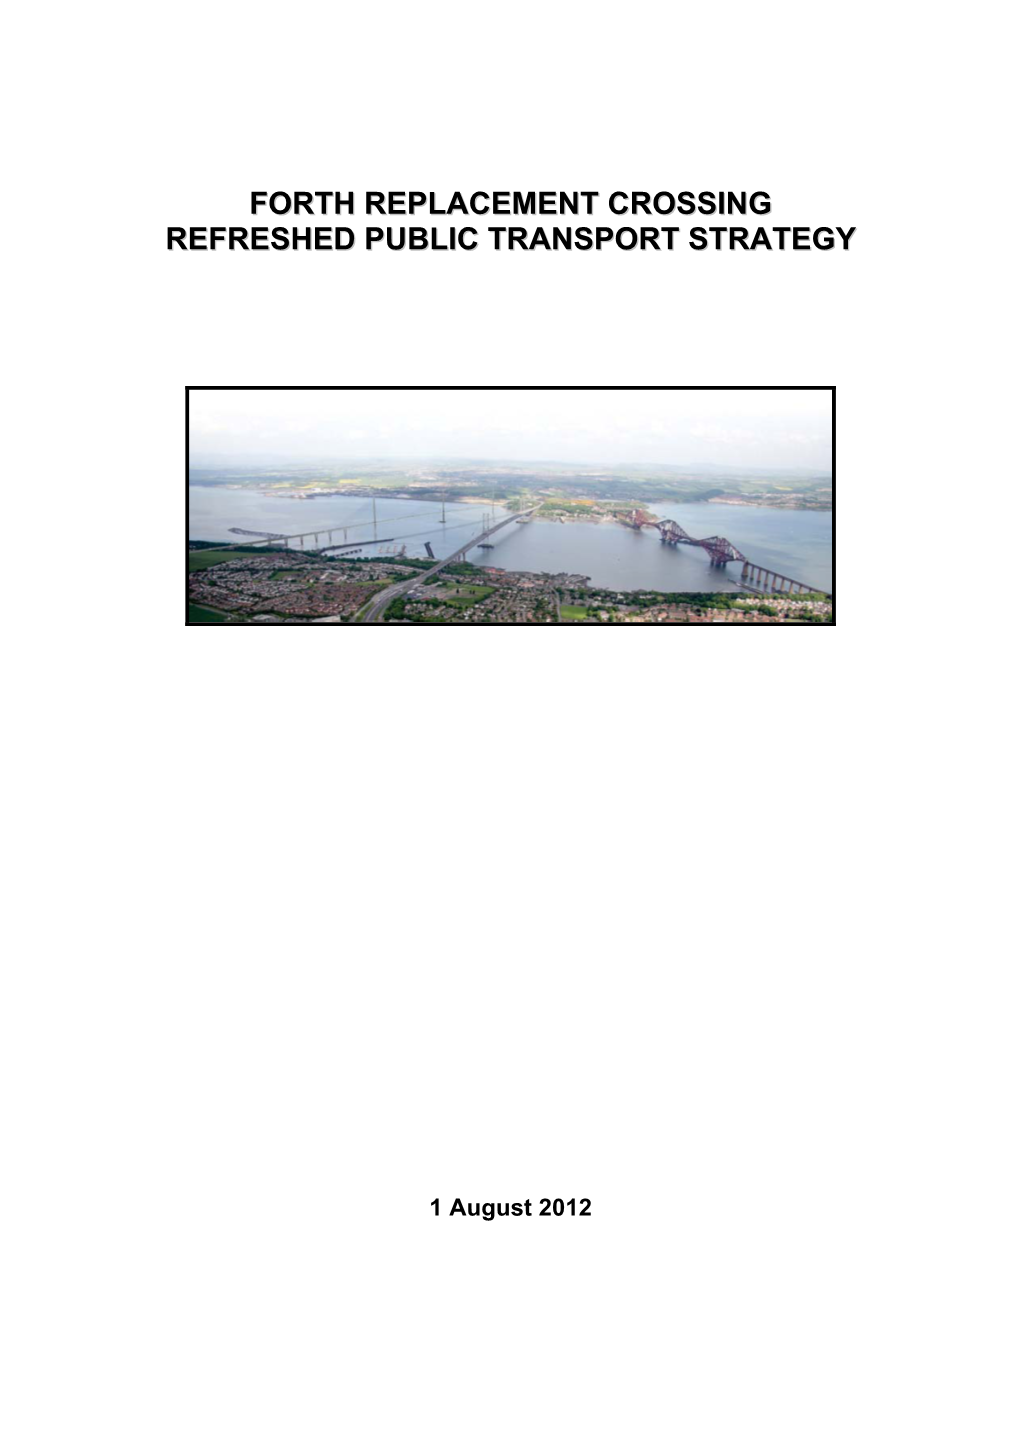 Forth Replacement Crossing Public Transport Strategy